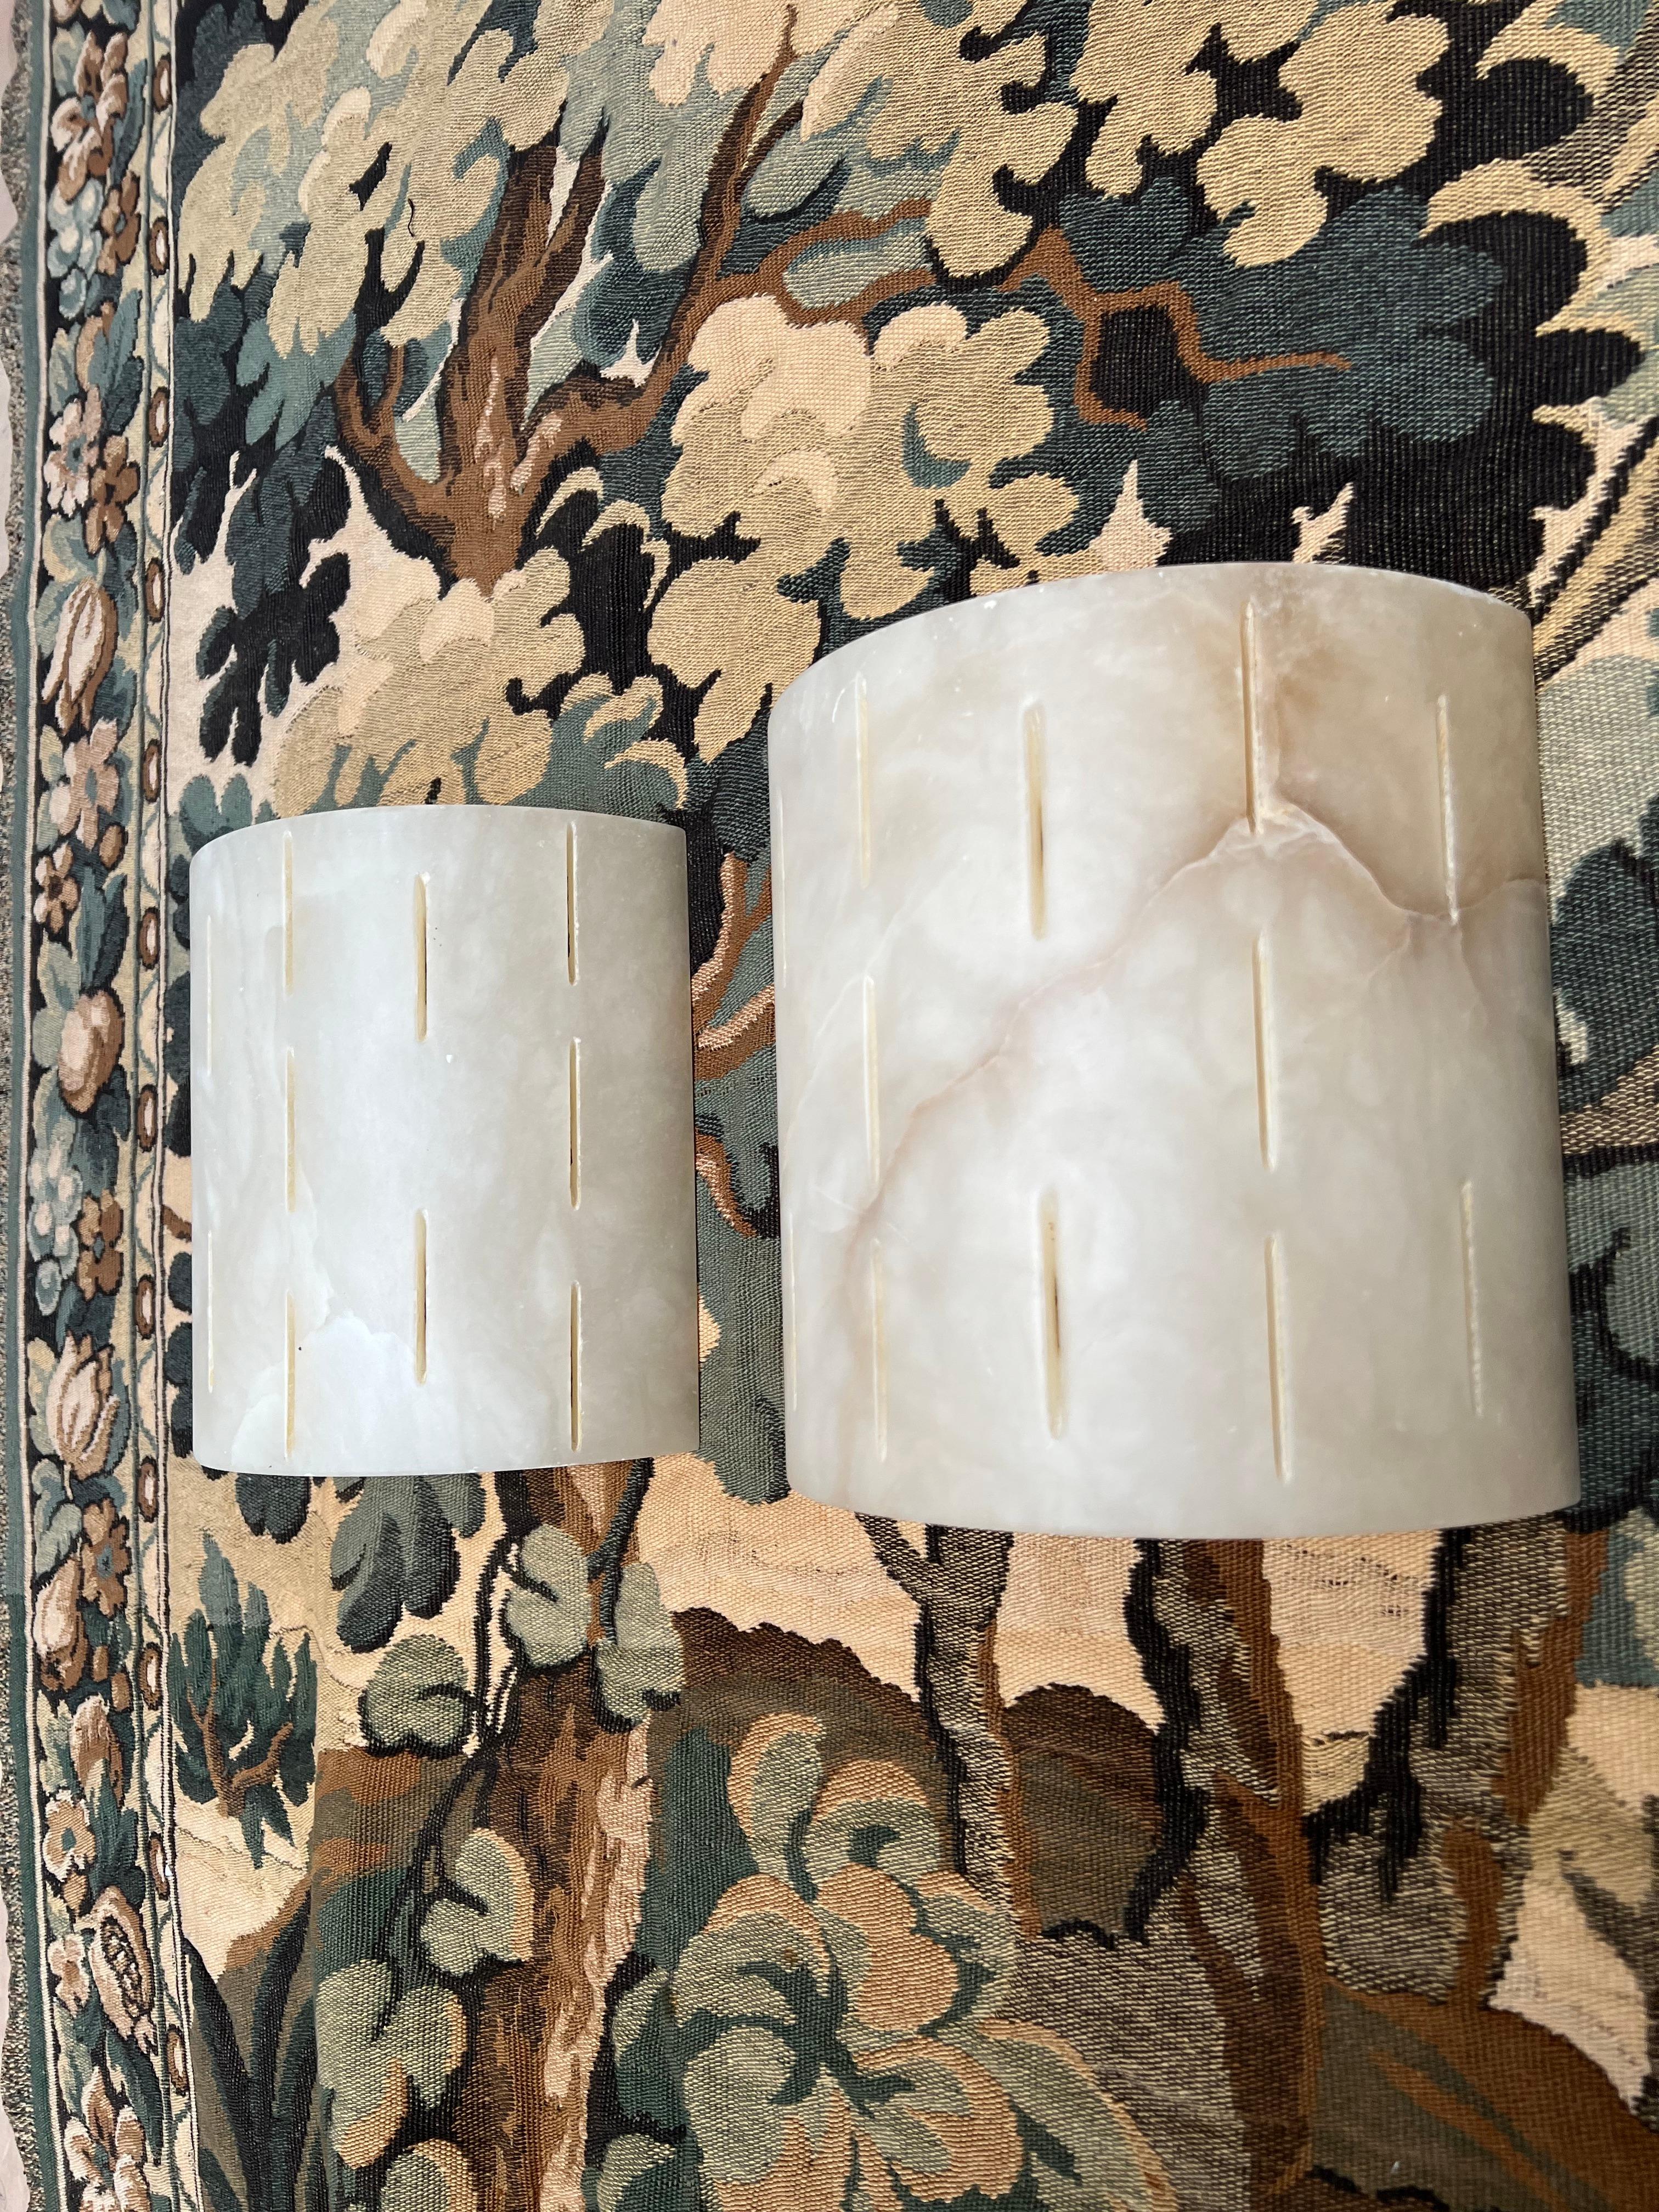 Timeless Design Pair of Art Deco Style Alabaster Wall Sconces / Light Fixtures For Sale 2